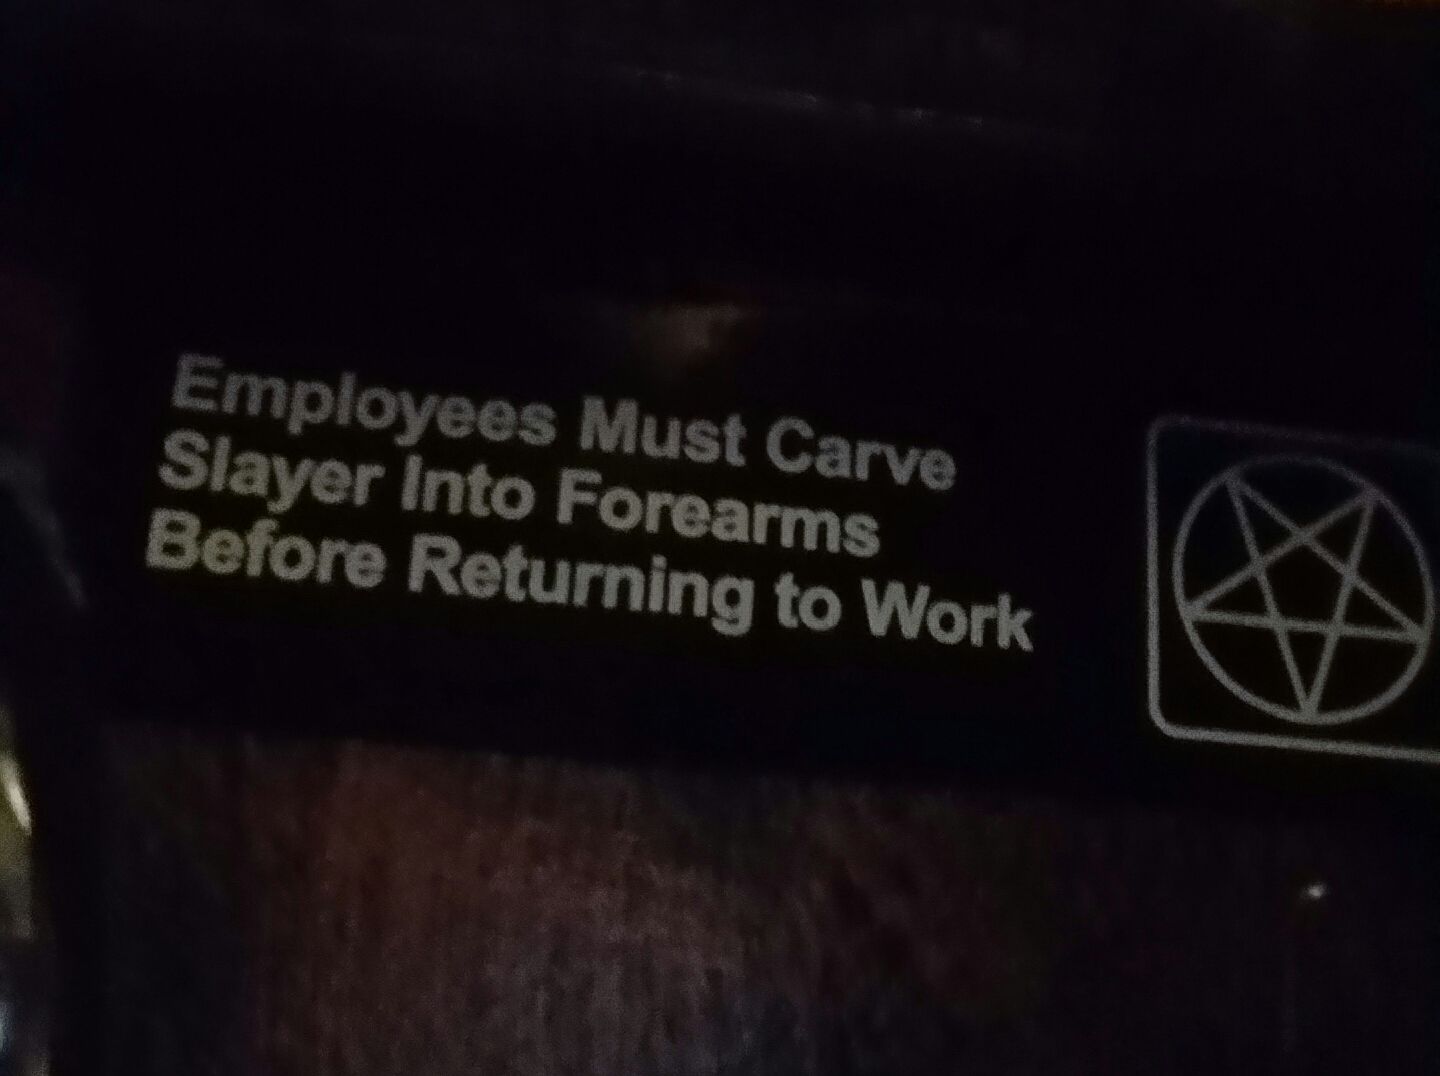 This sign in the bathroom at a bar last night...